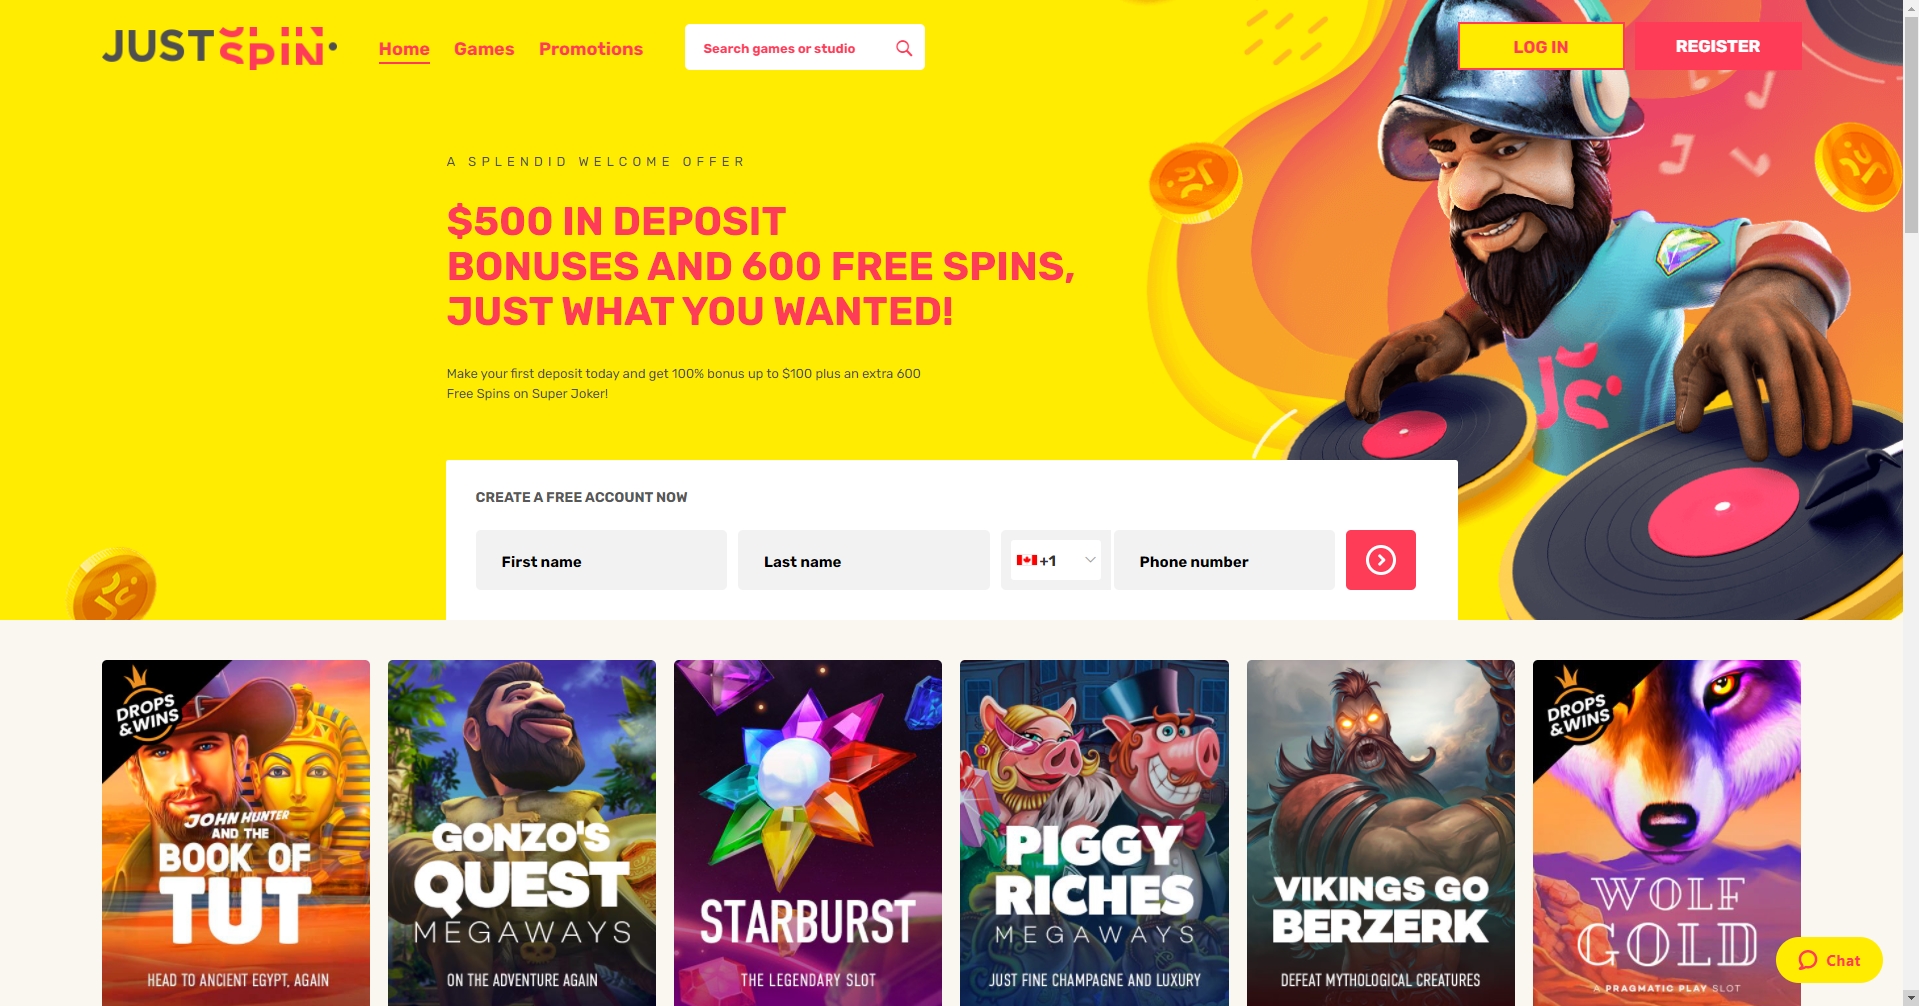 JustSpin Casino Review